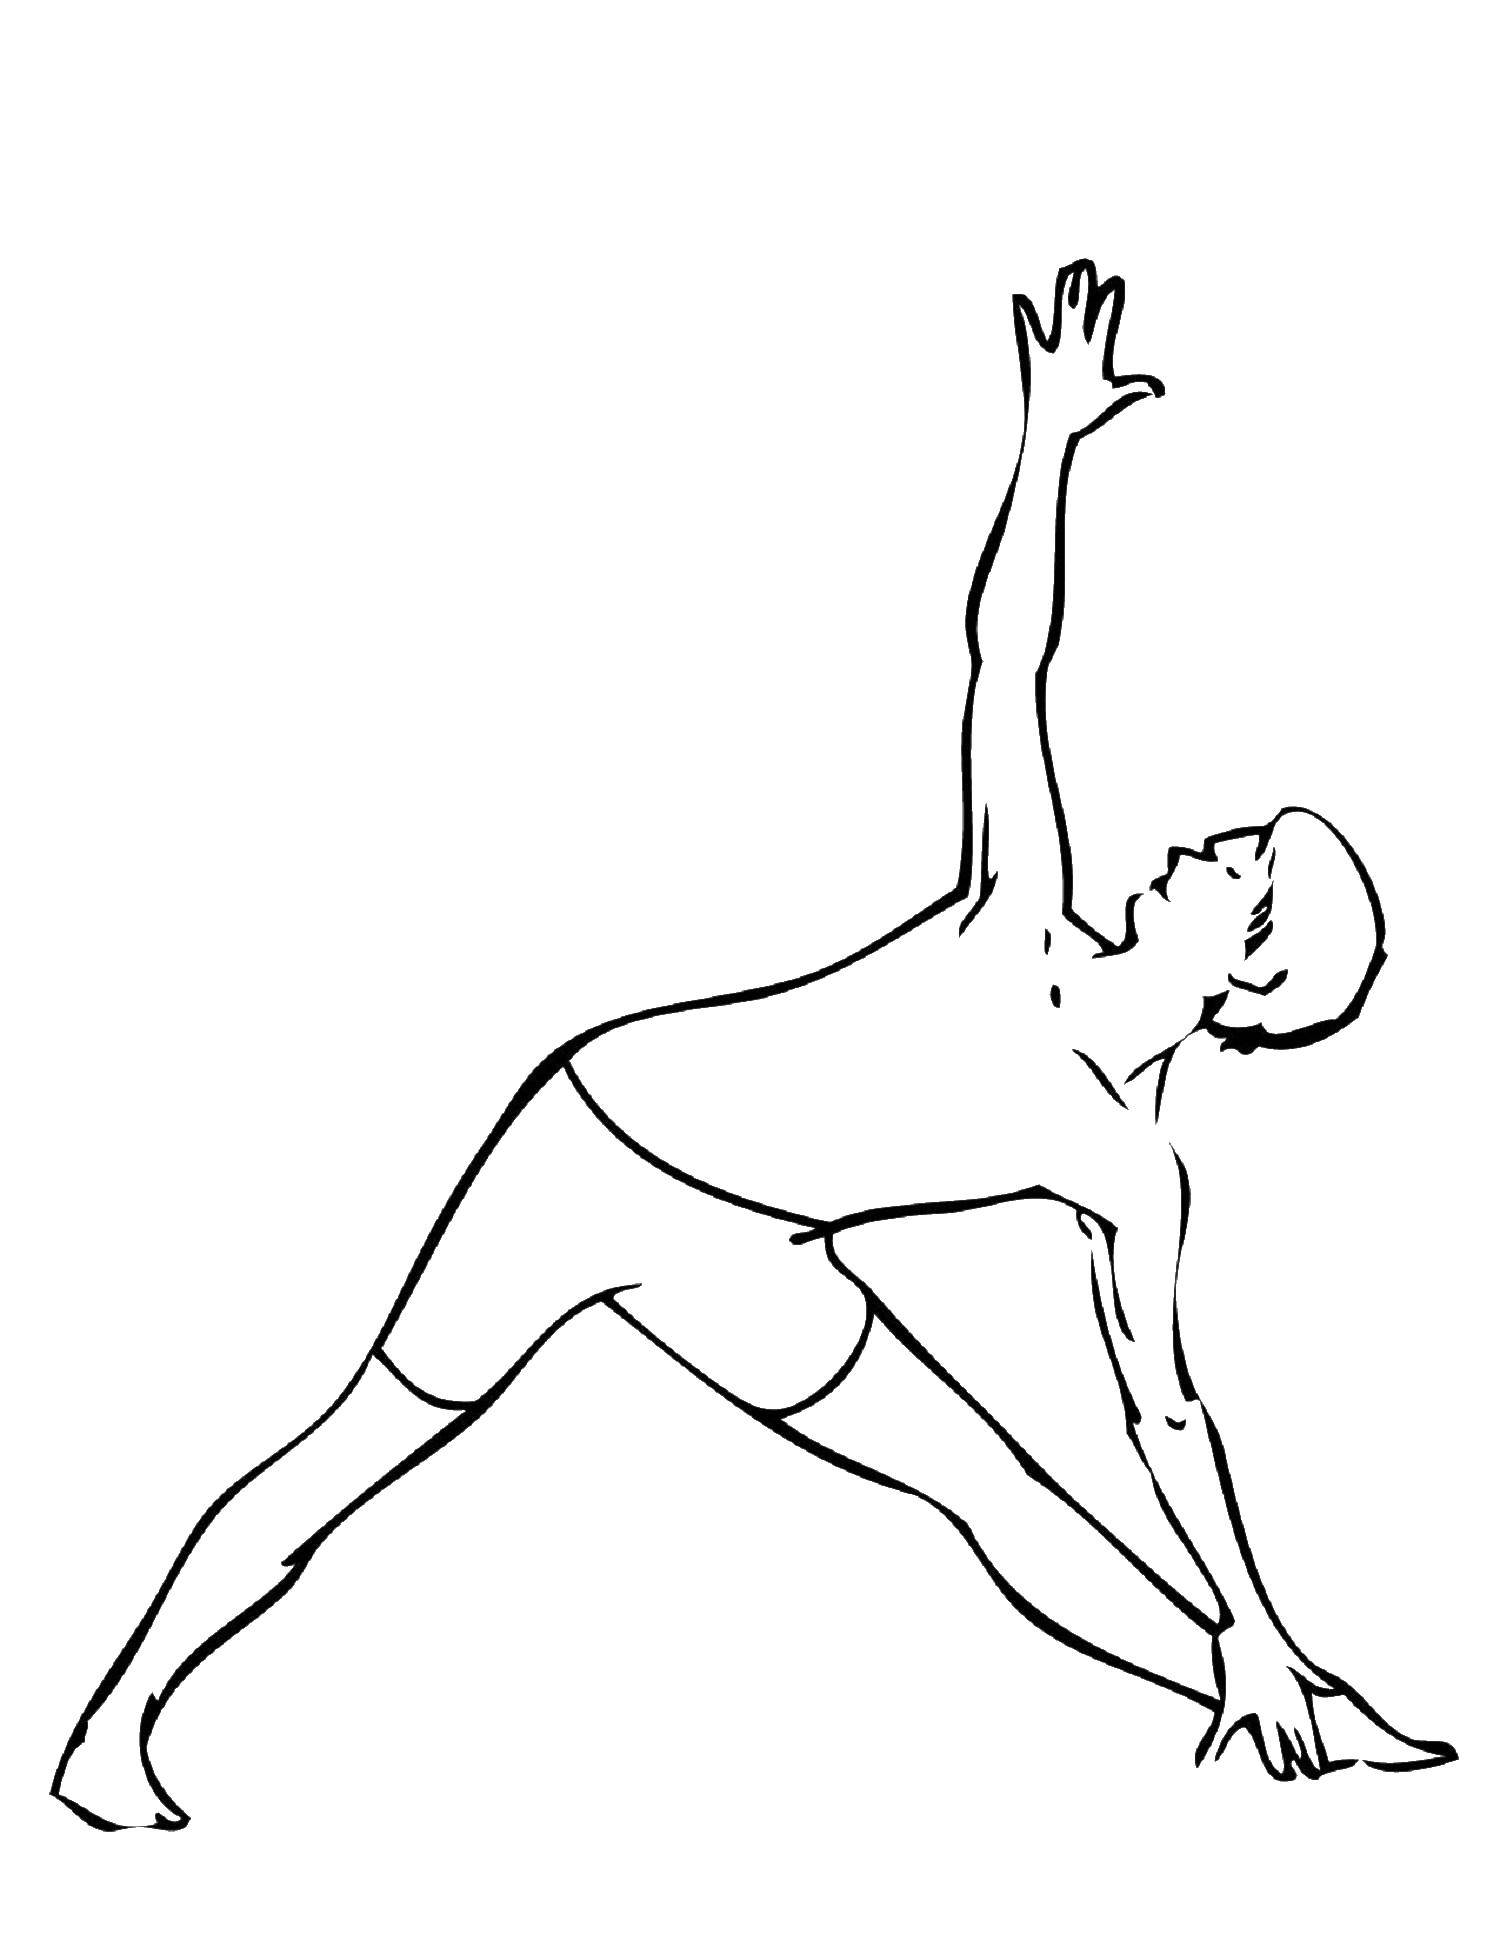 Coloring The physical exercises of yoga. Category yoga. Tags:  physical education.